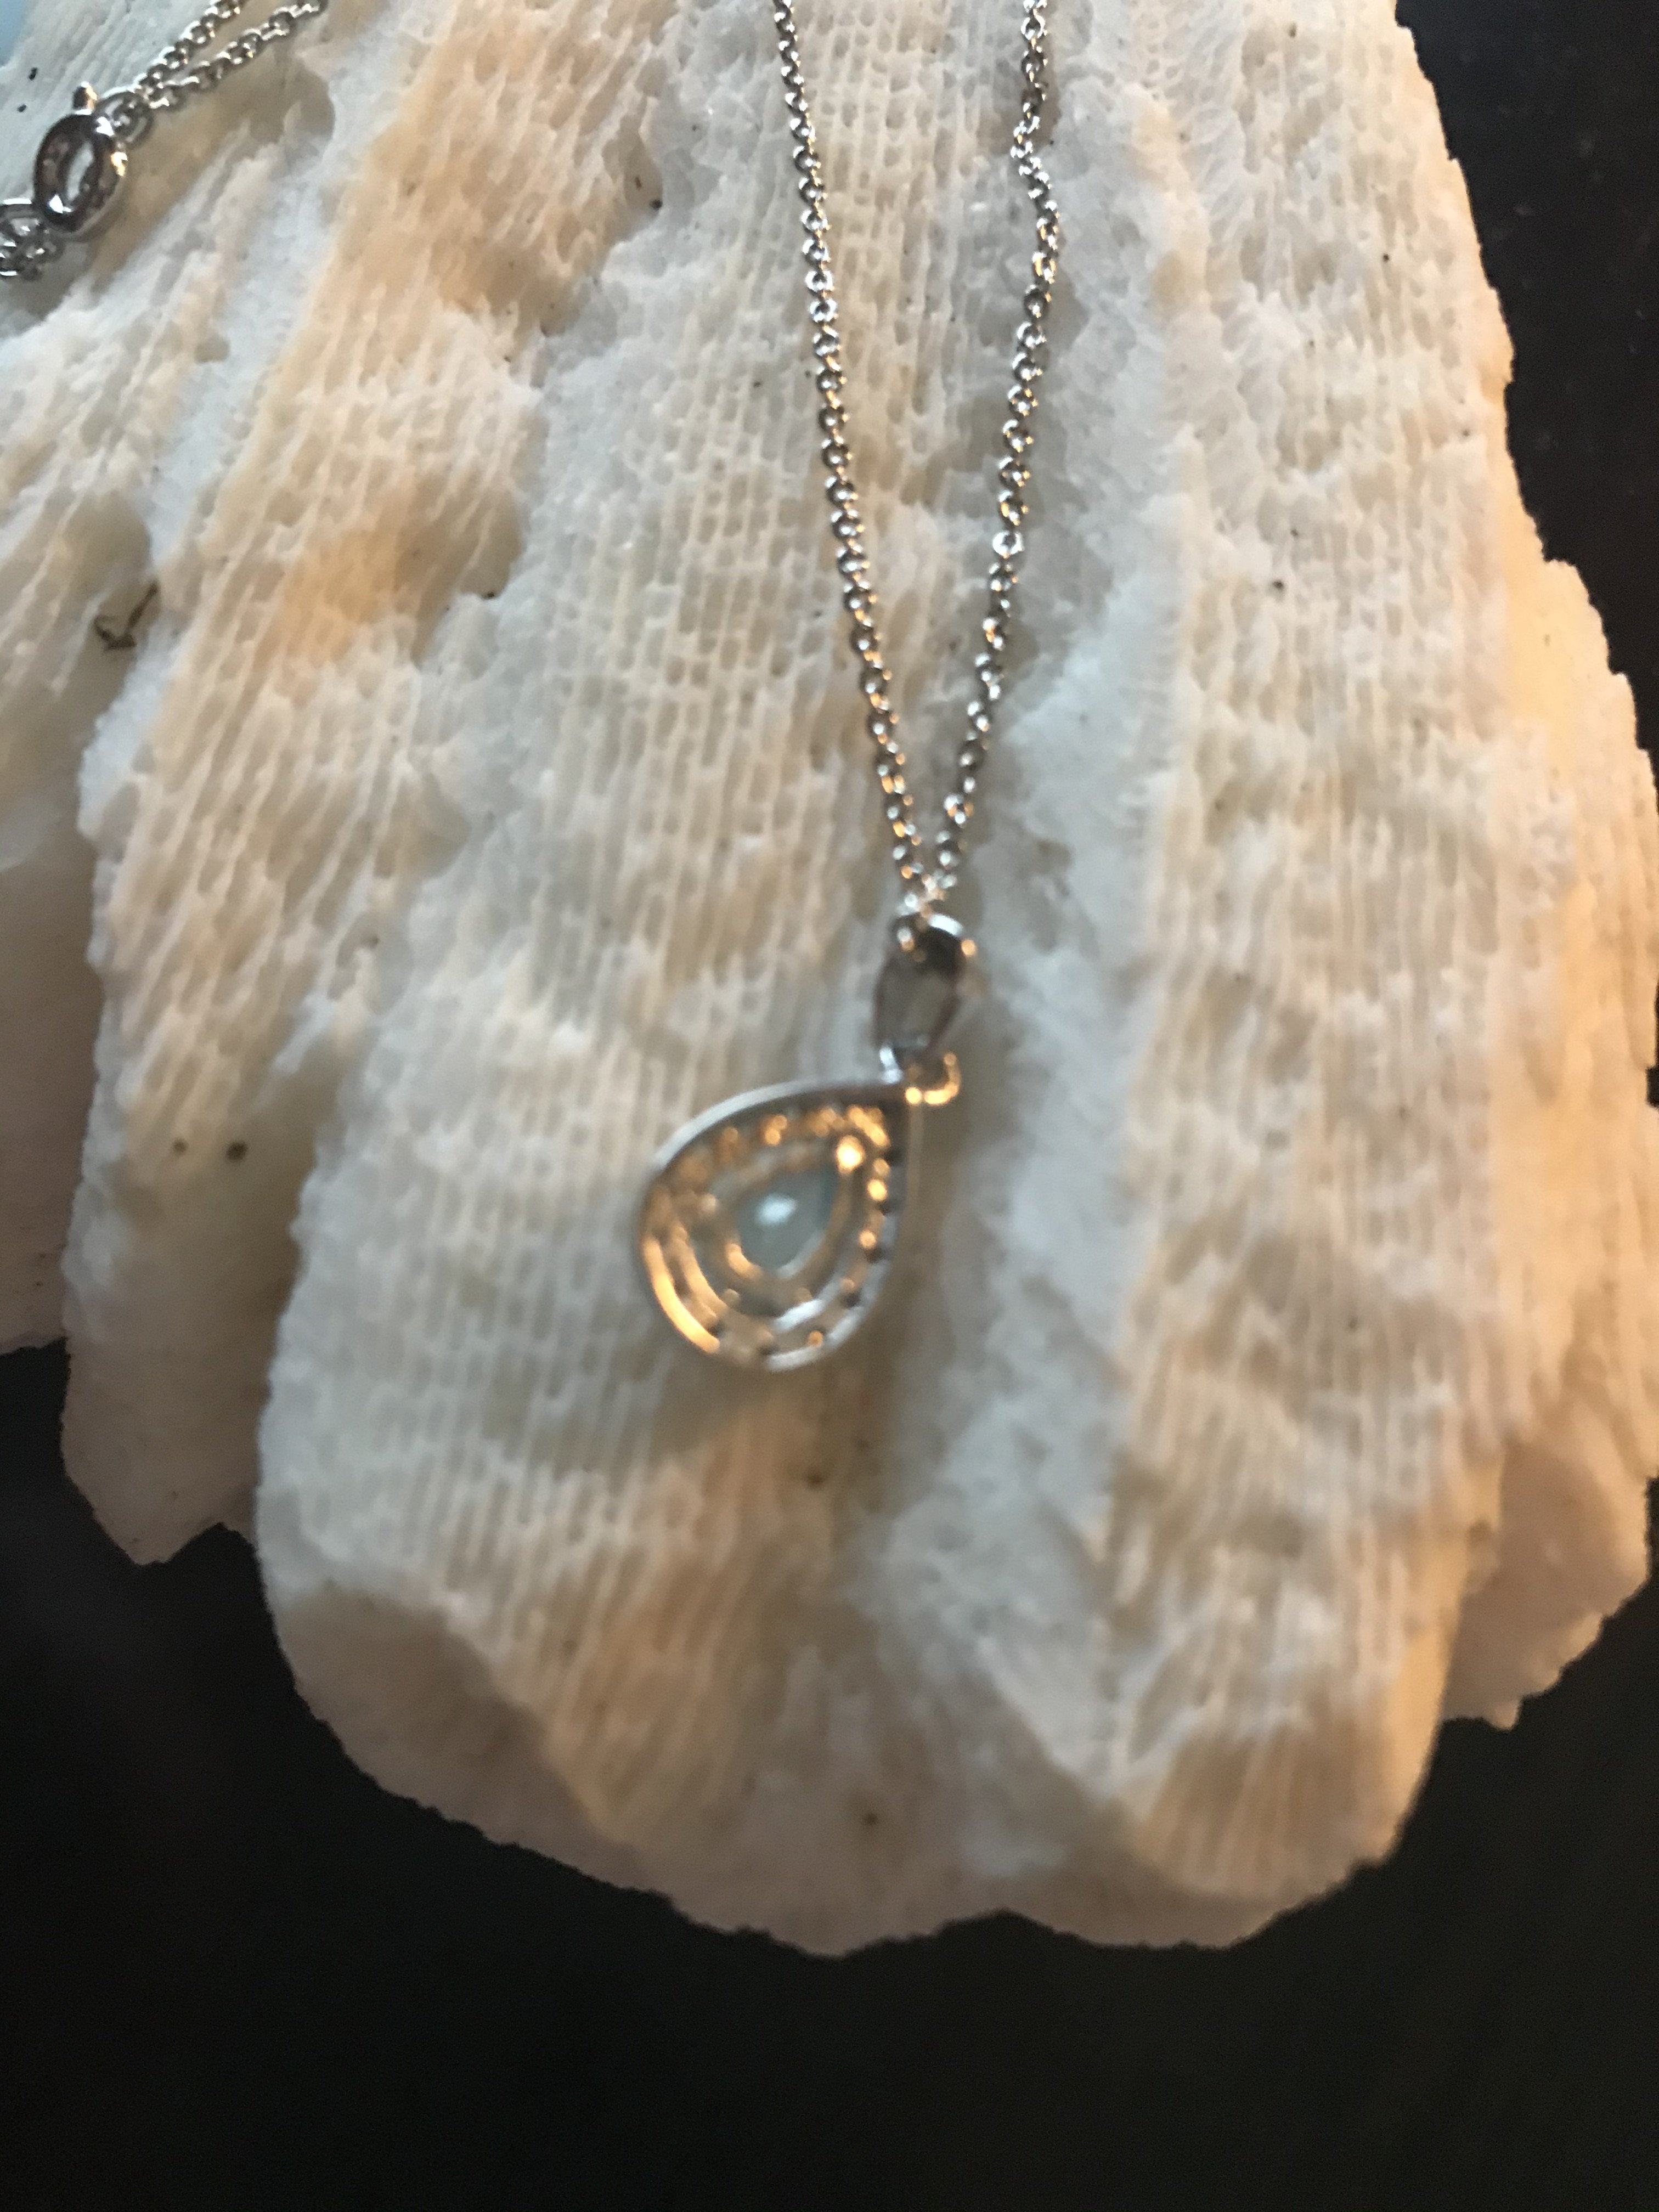 Silver Sky Blue Topaz Pear-Shaped Pendant Necklace - Shop Thrifty Treasures